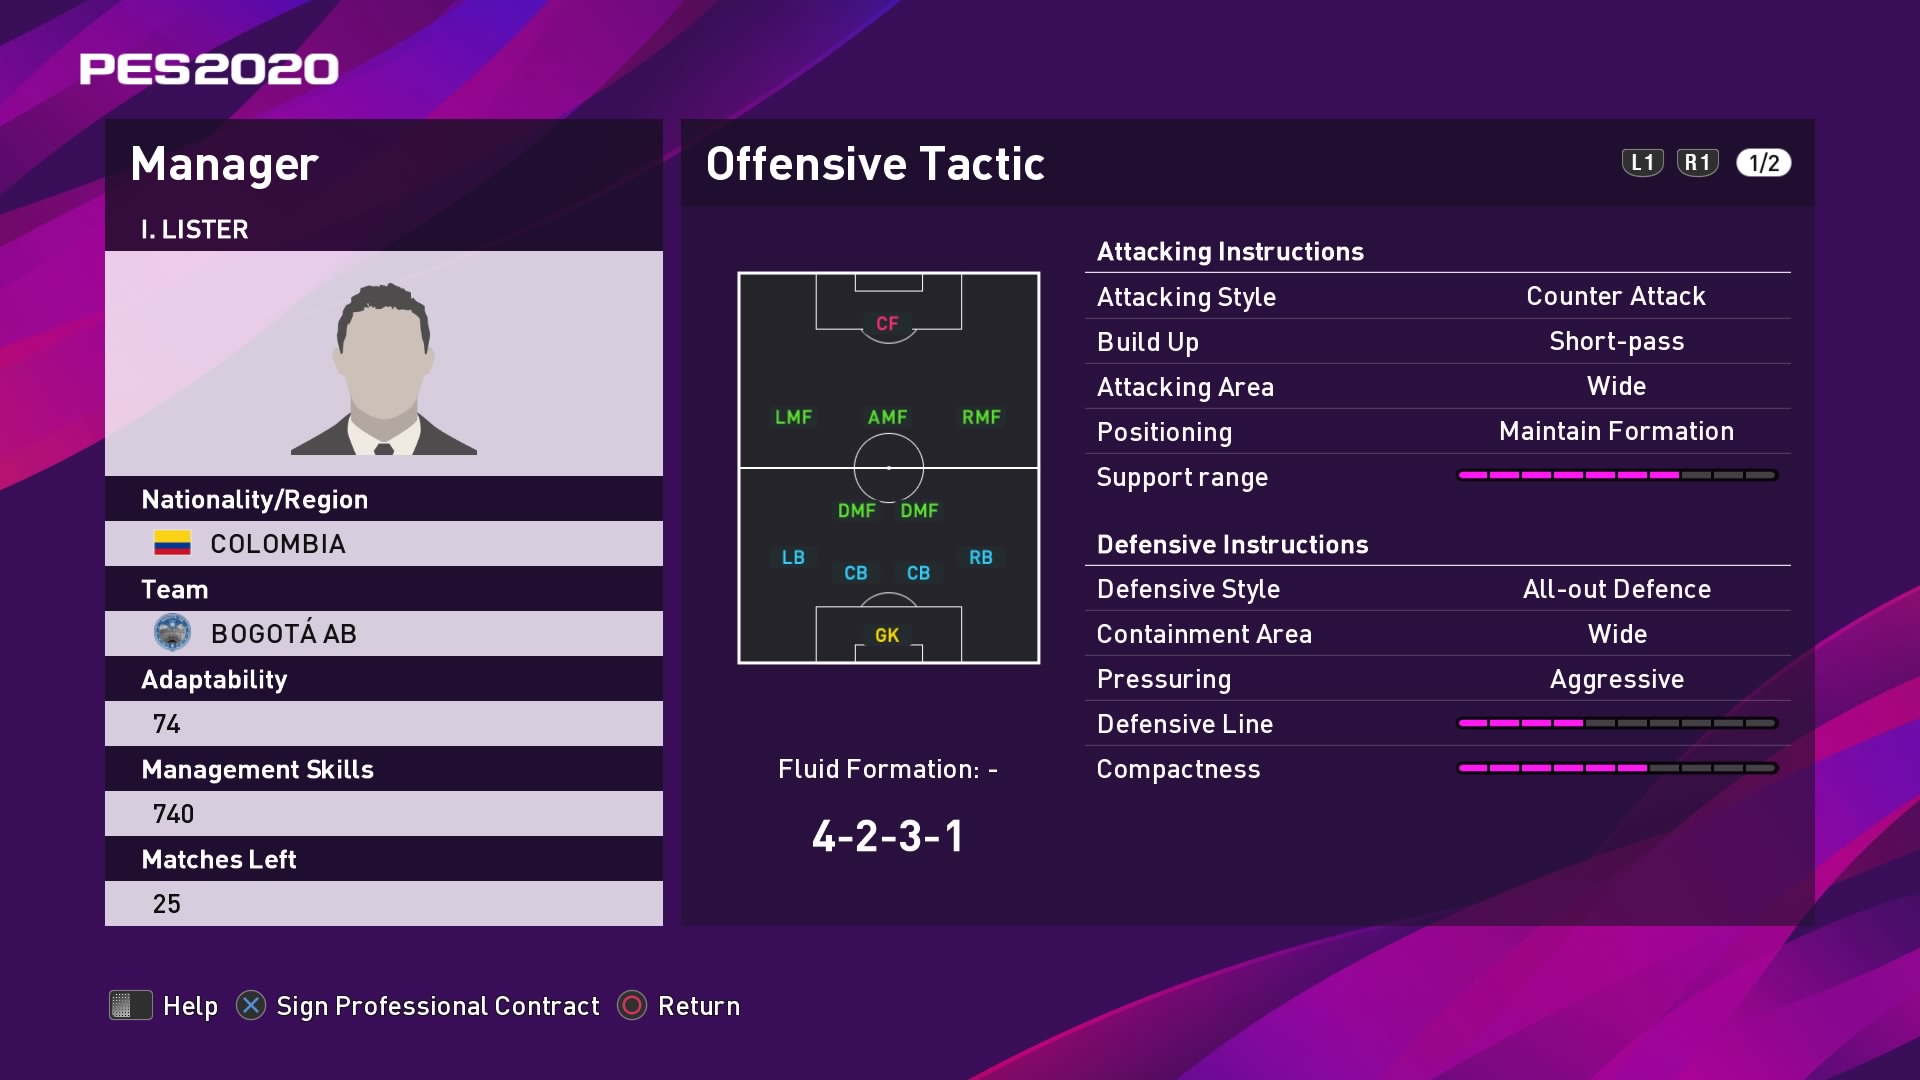 I. Lister (Jorge Luis Pinto) Offensive Tactic in PES 2020 myClub